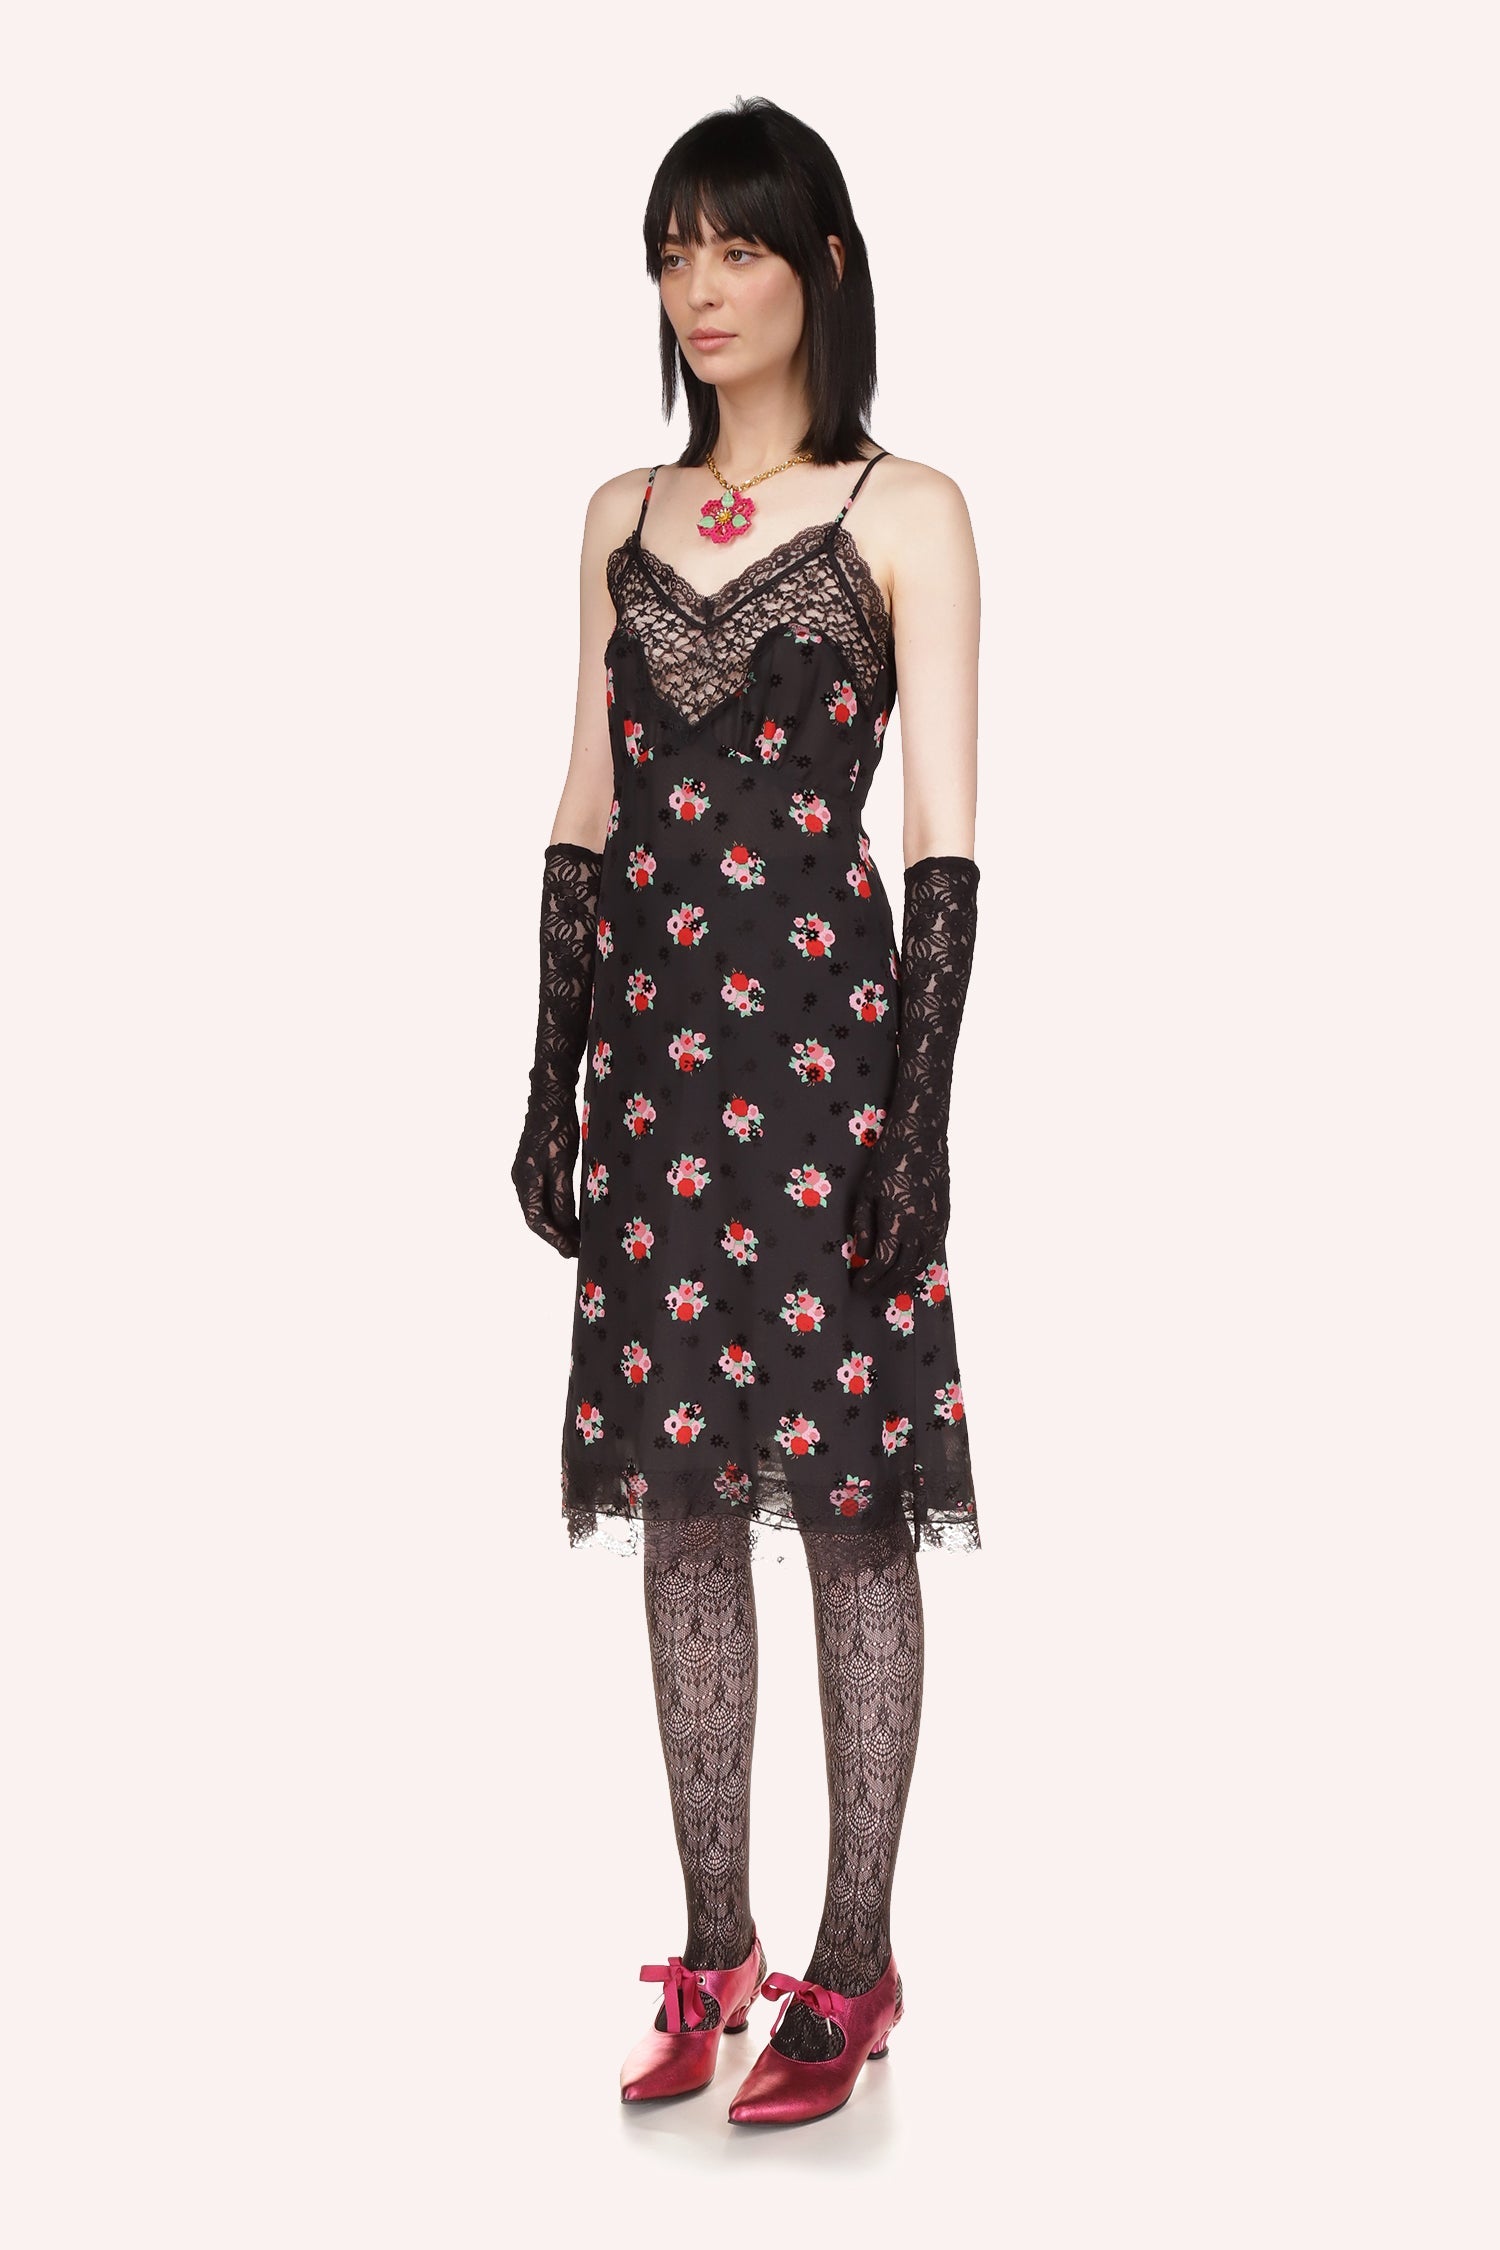  Anna Sui dress features a V-shape black lace on the top and bottom and has a sleeveless design